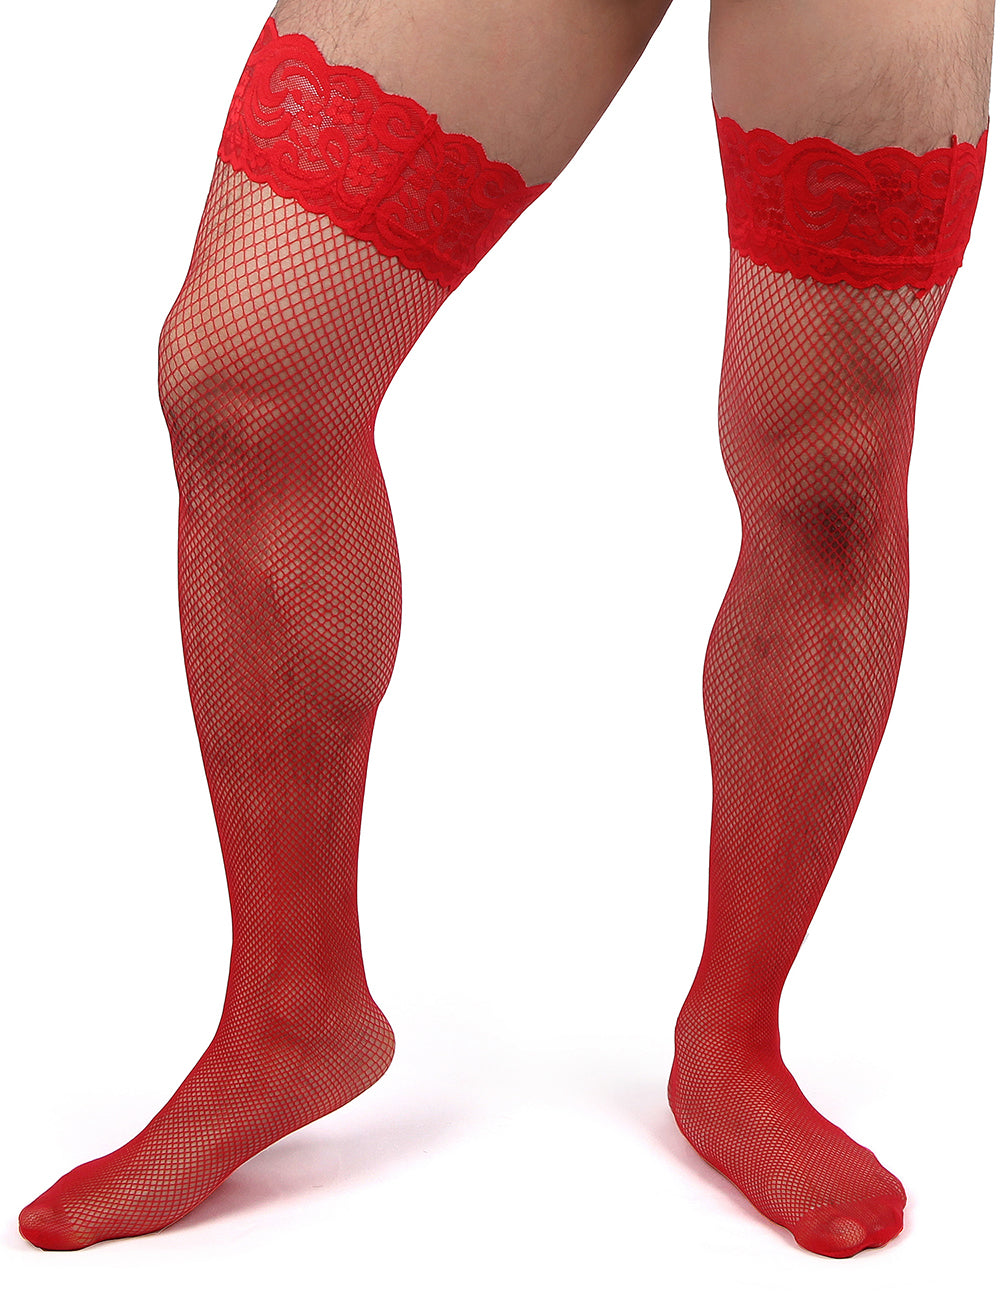 Unisex Fishnet Lace Top Stockings, Strong for Our Males to Wear! Red